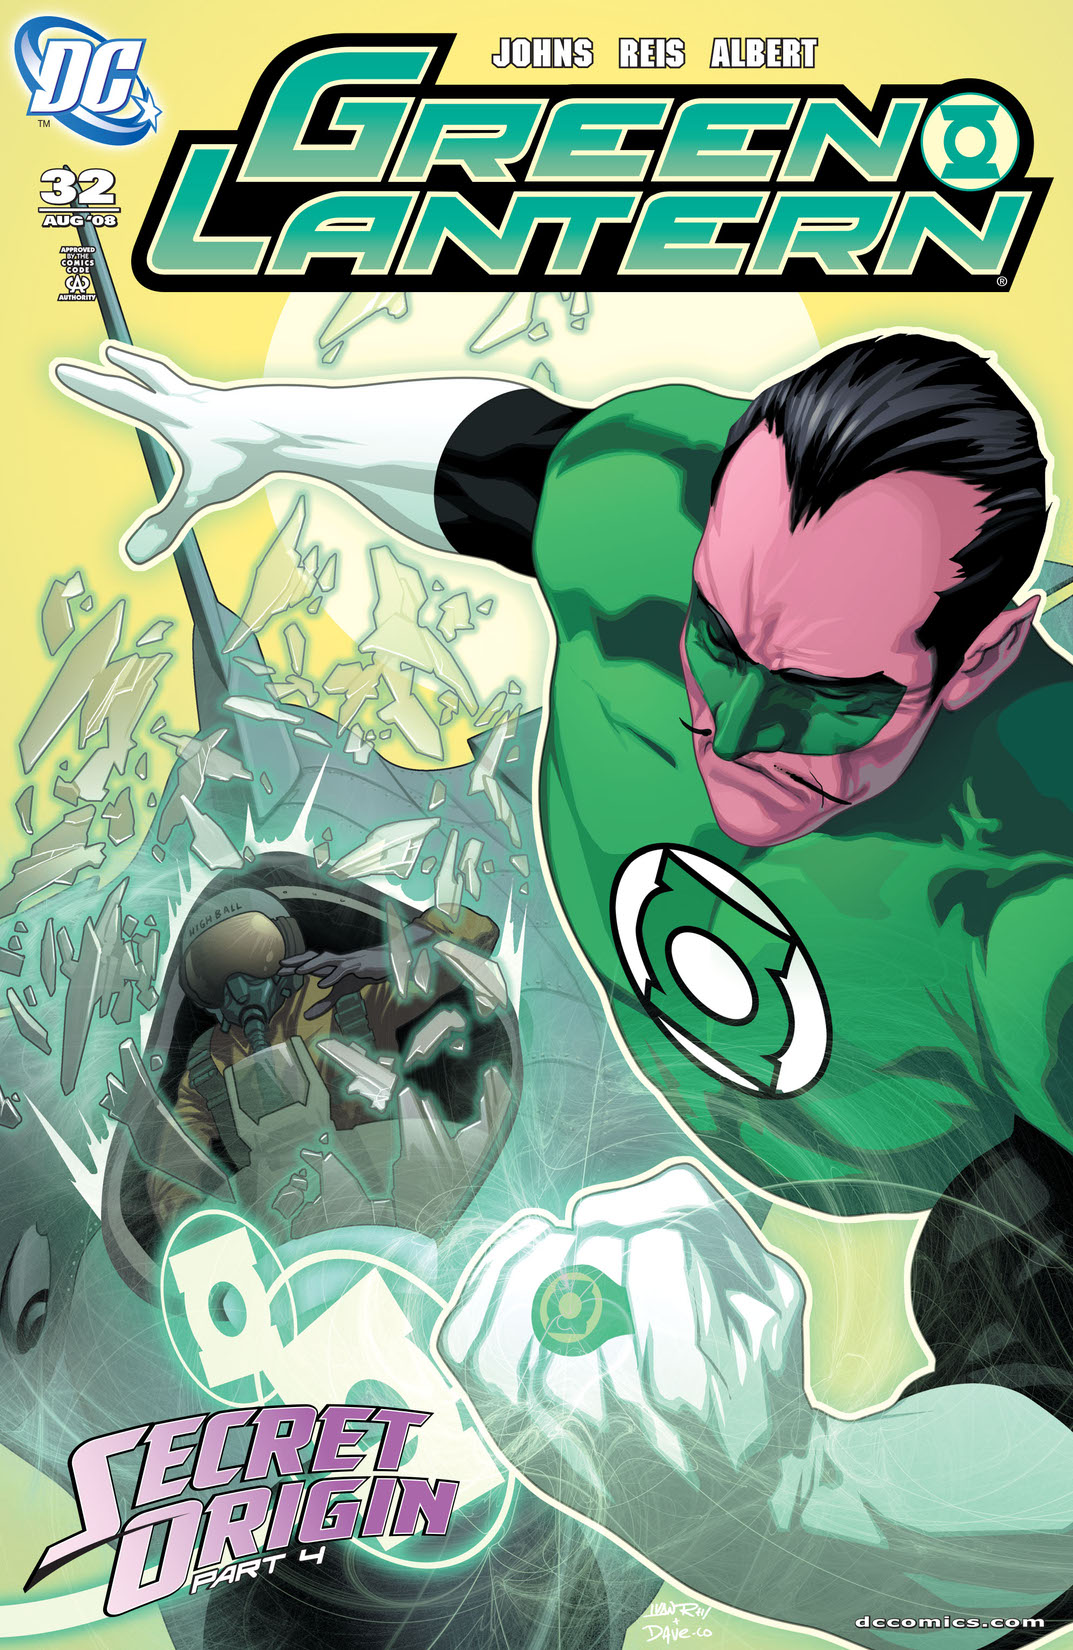 Green Lantern (2005-) #32 preview images